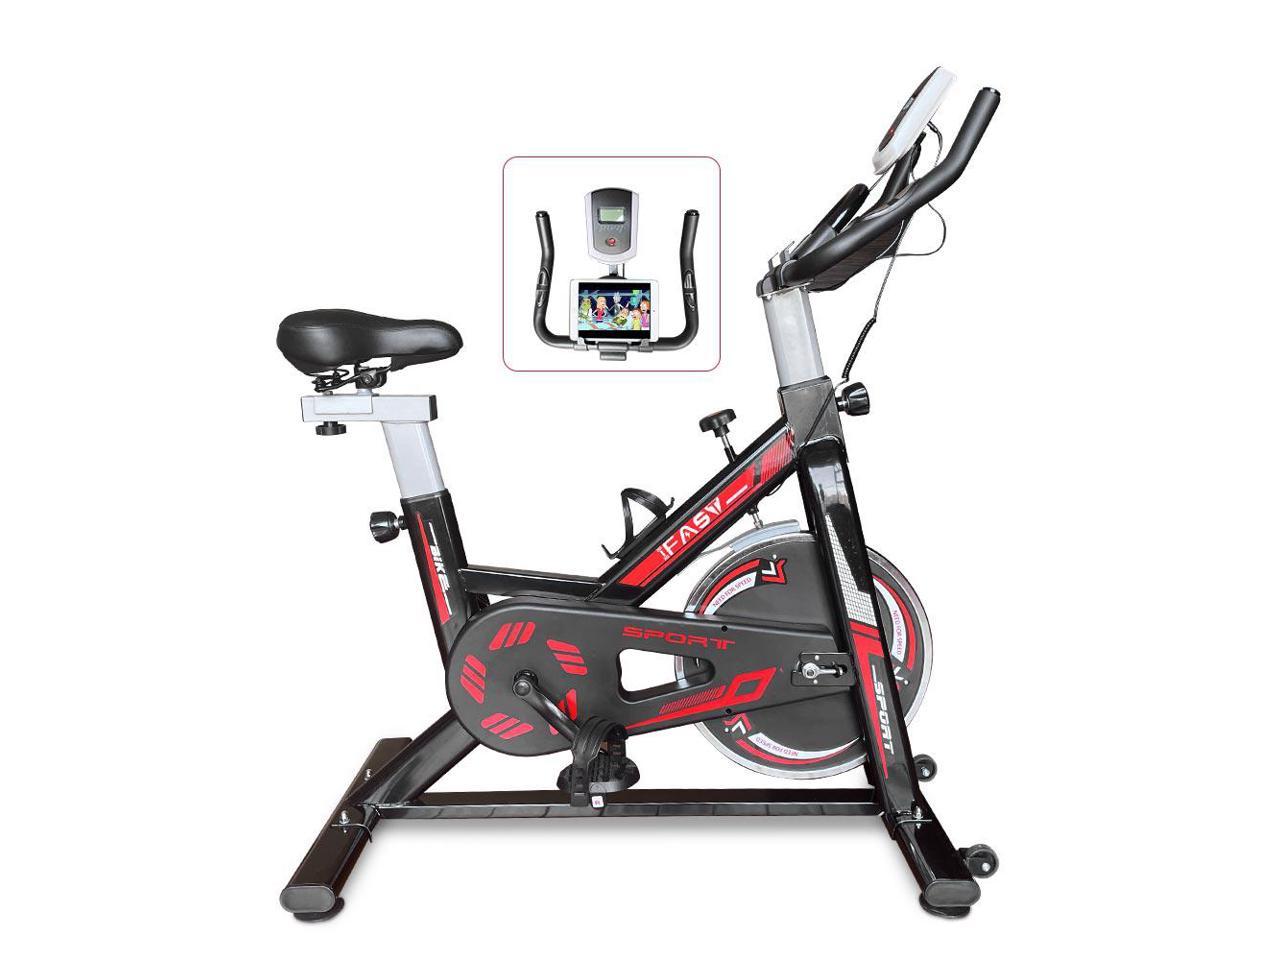 Details about   Indoor Exercise Bikes Stationary Cardio Home Gym Workout Cycling Fitness Bicycle 